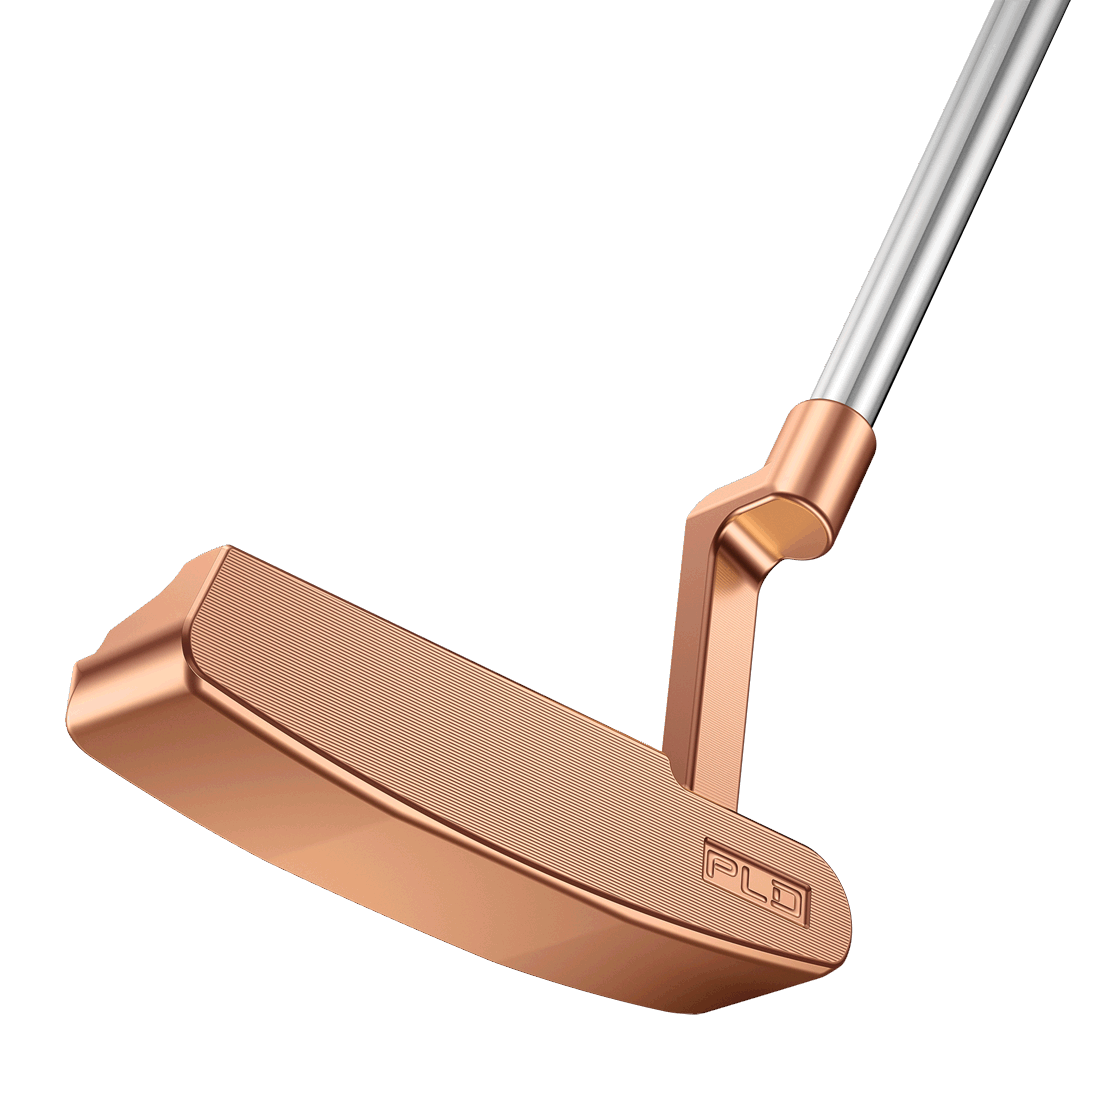 PLD Limited Anser Patent 55 Putter